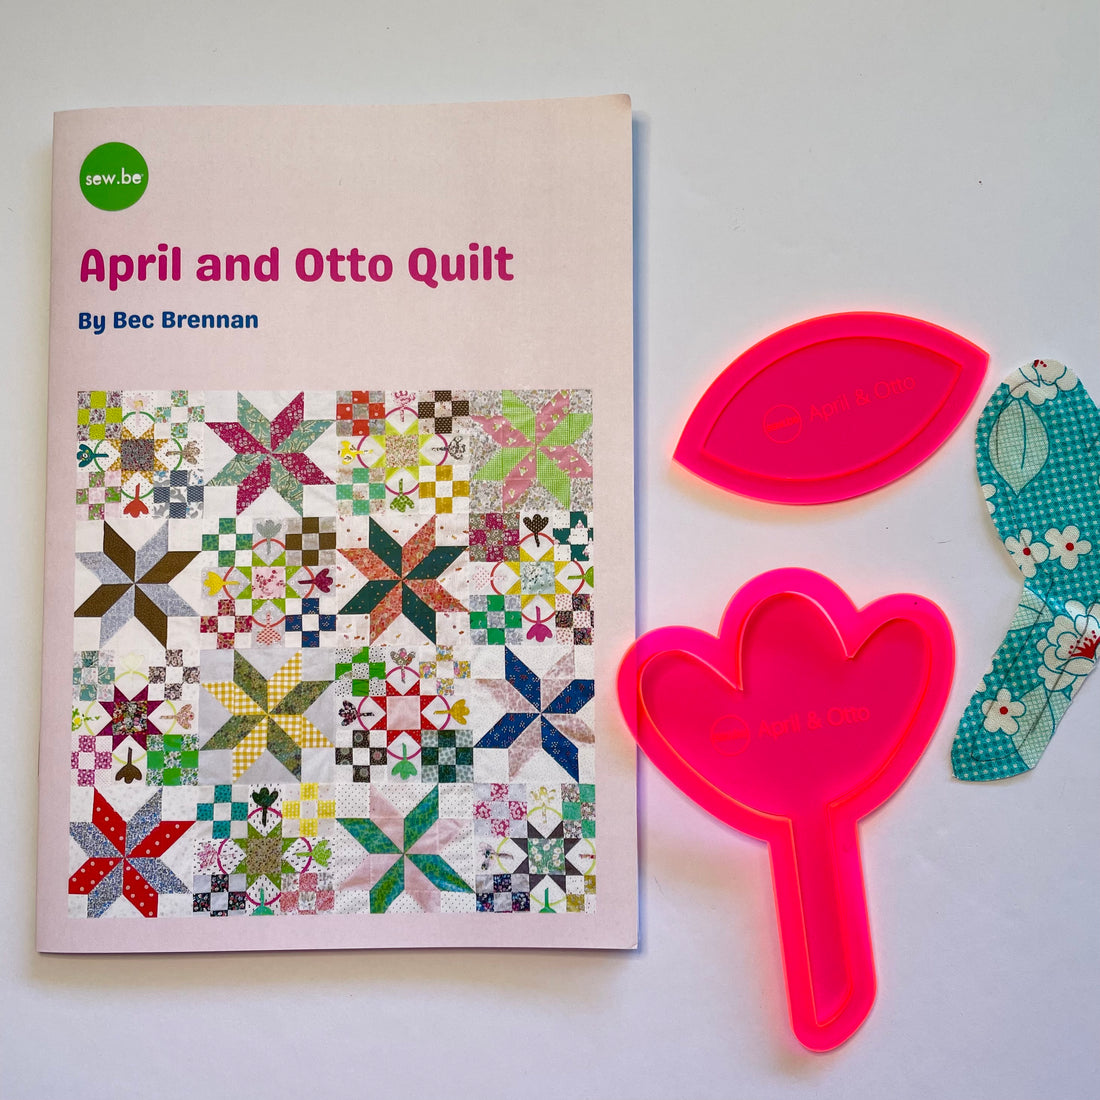 April and Otto Quilt - My heart in a quilt.